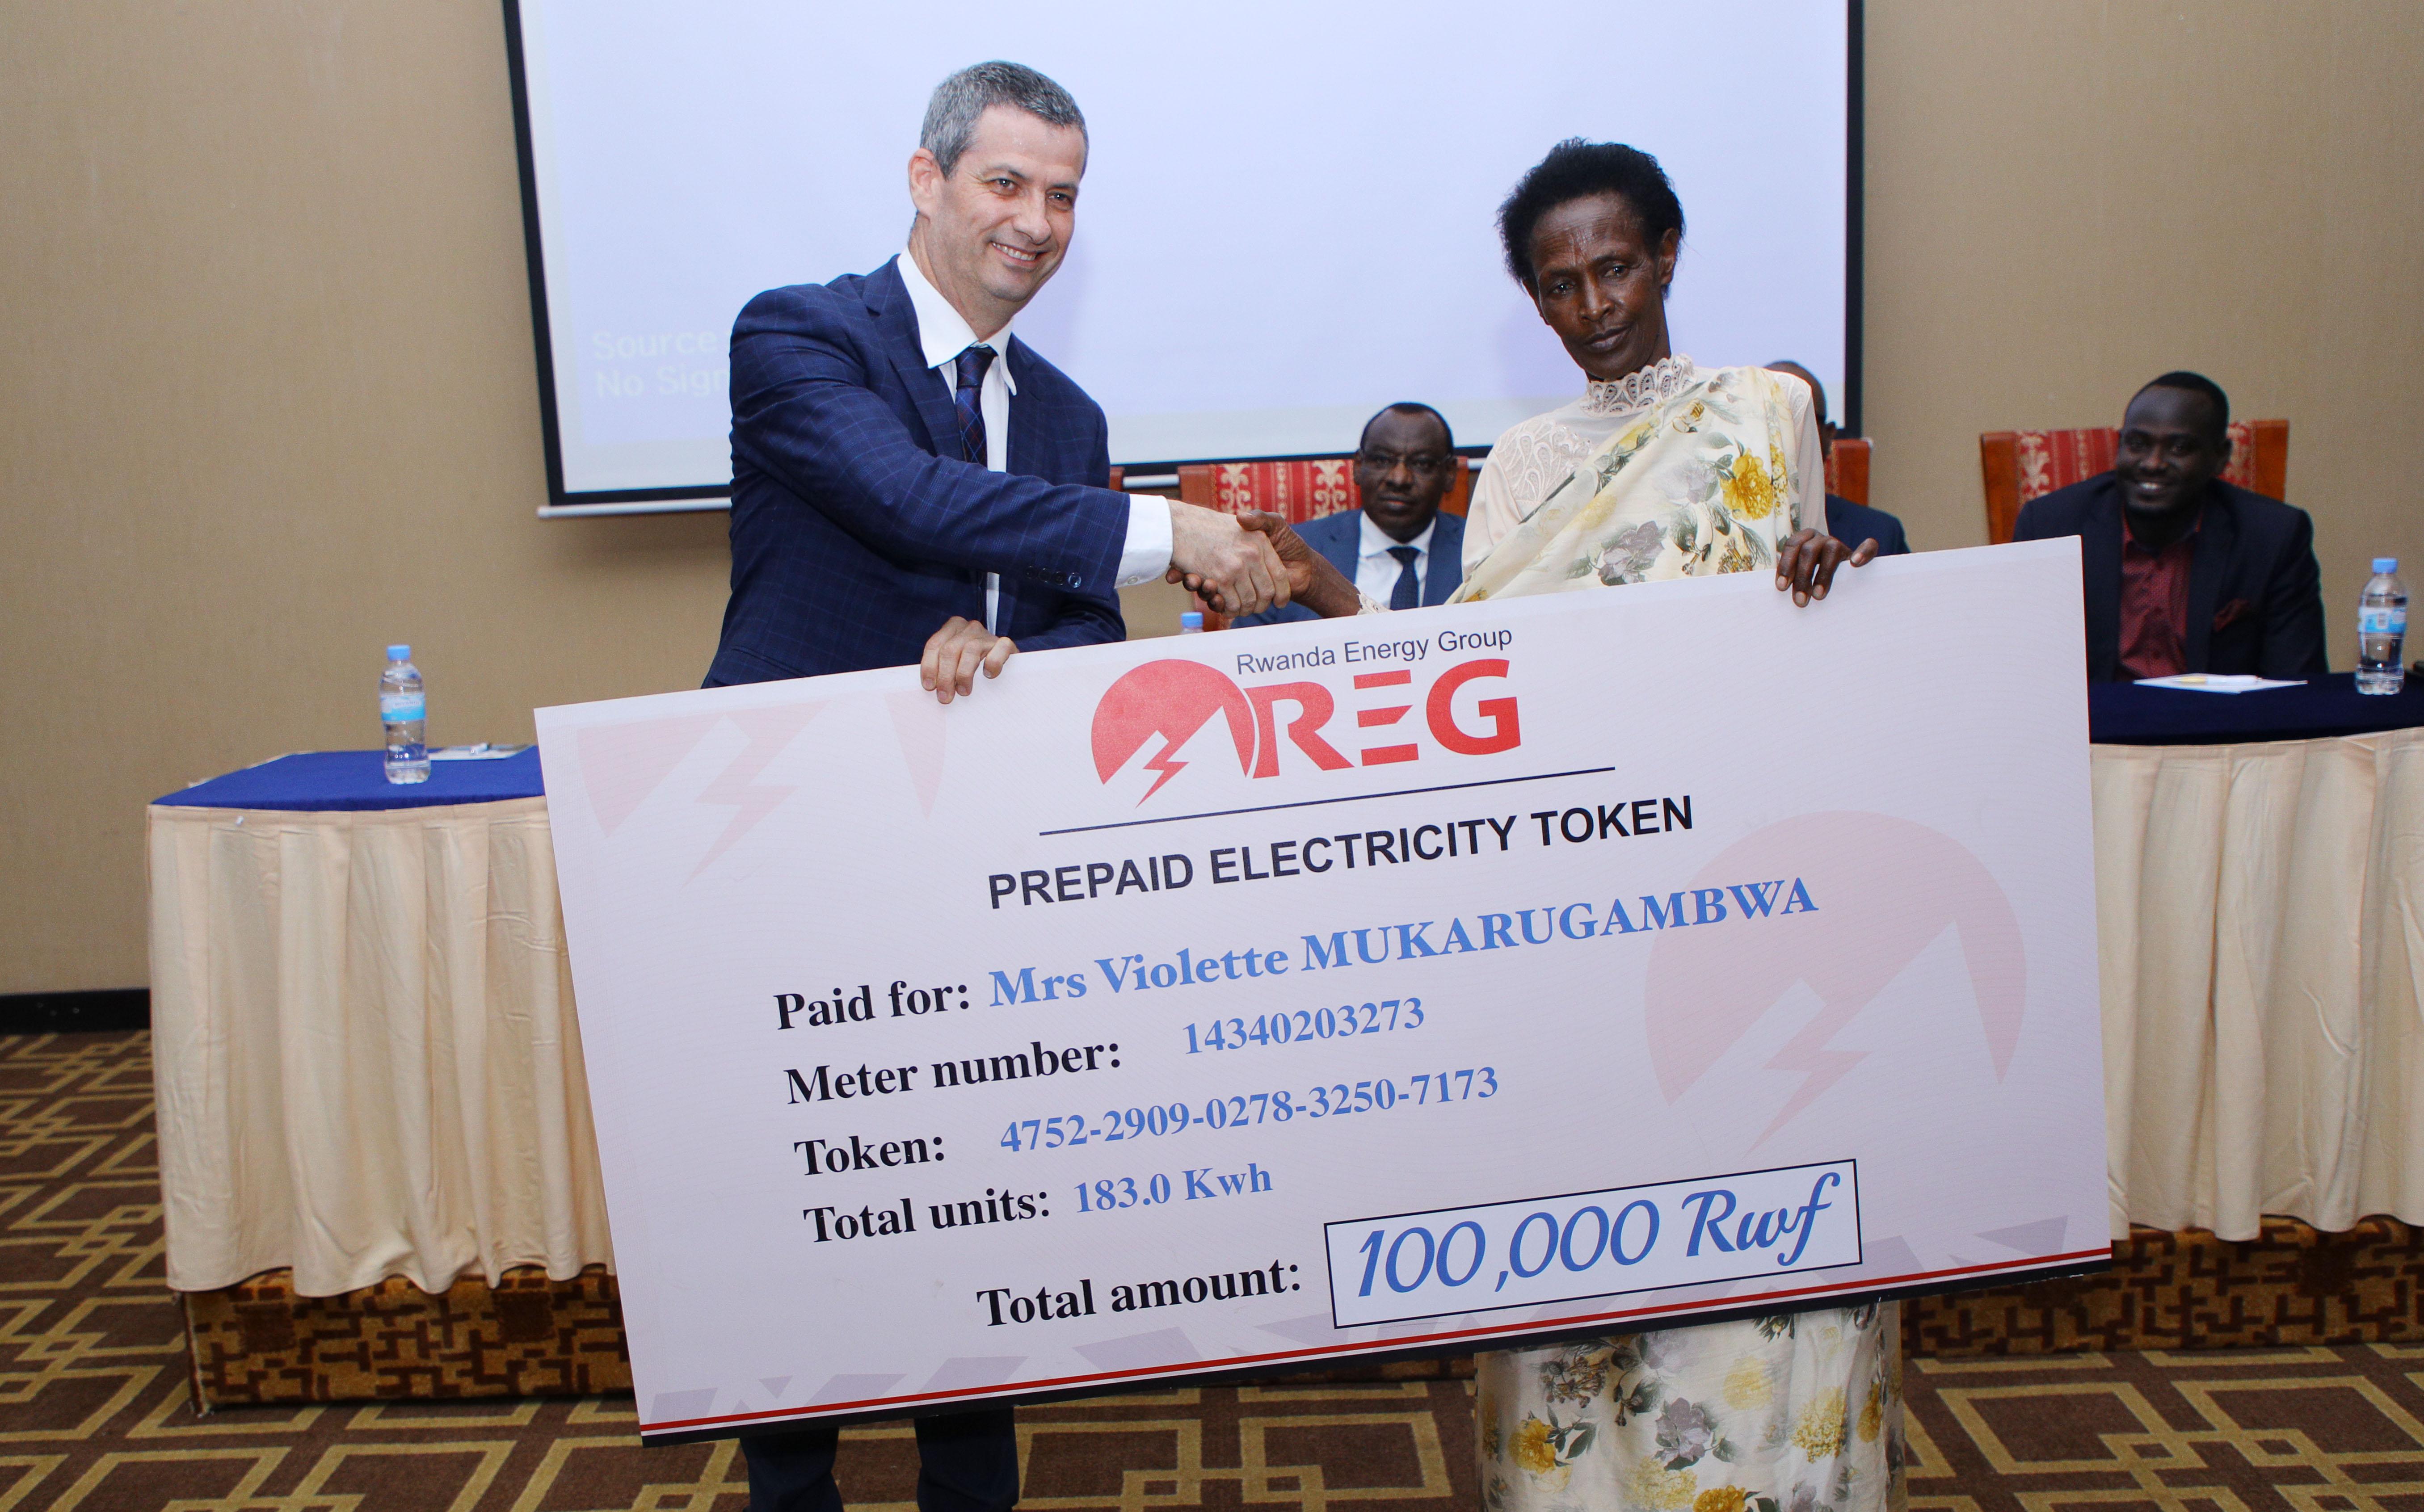 Ron Weiss, the CEO of Rwanda Energy Group (REG) recognized the one millionth customer, Violette Mukankuranga, a resident of Mwulire sector in Rwamagana District (Sam Ngendahimana)